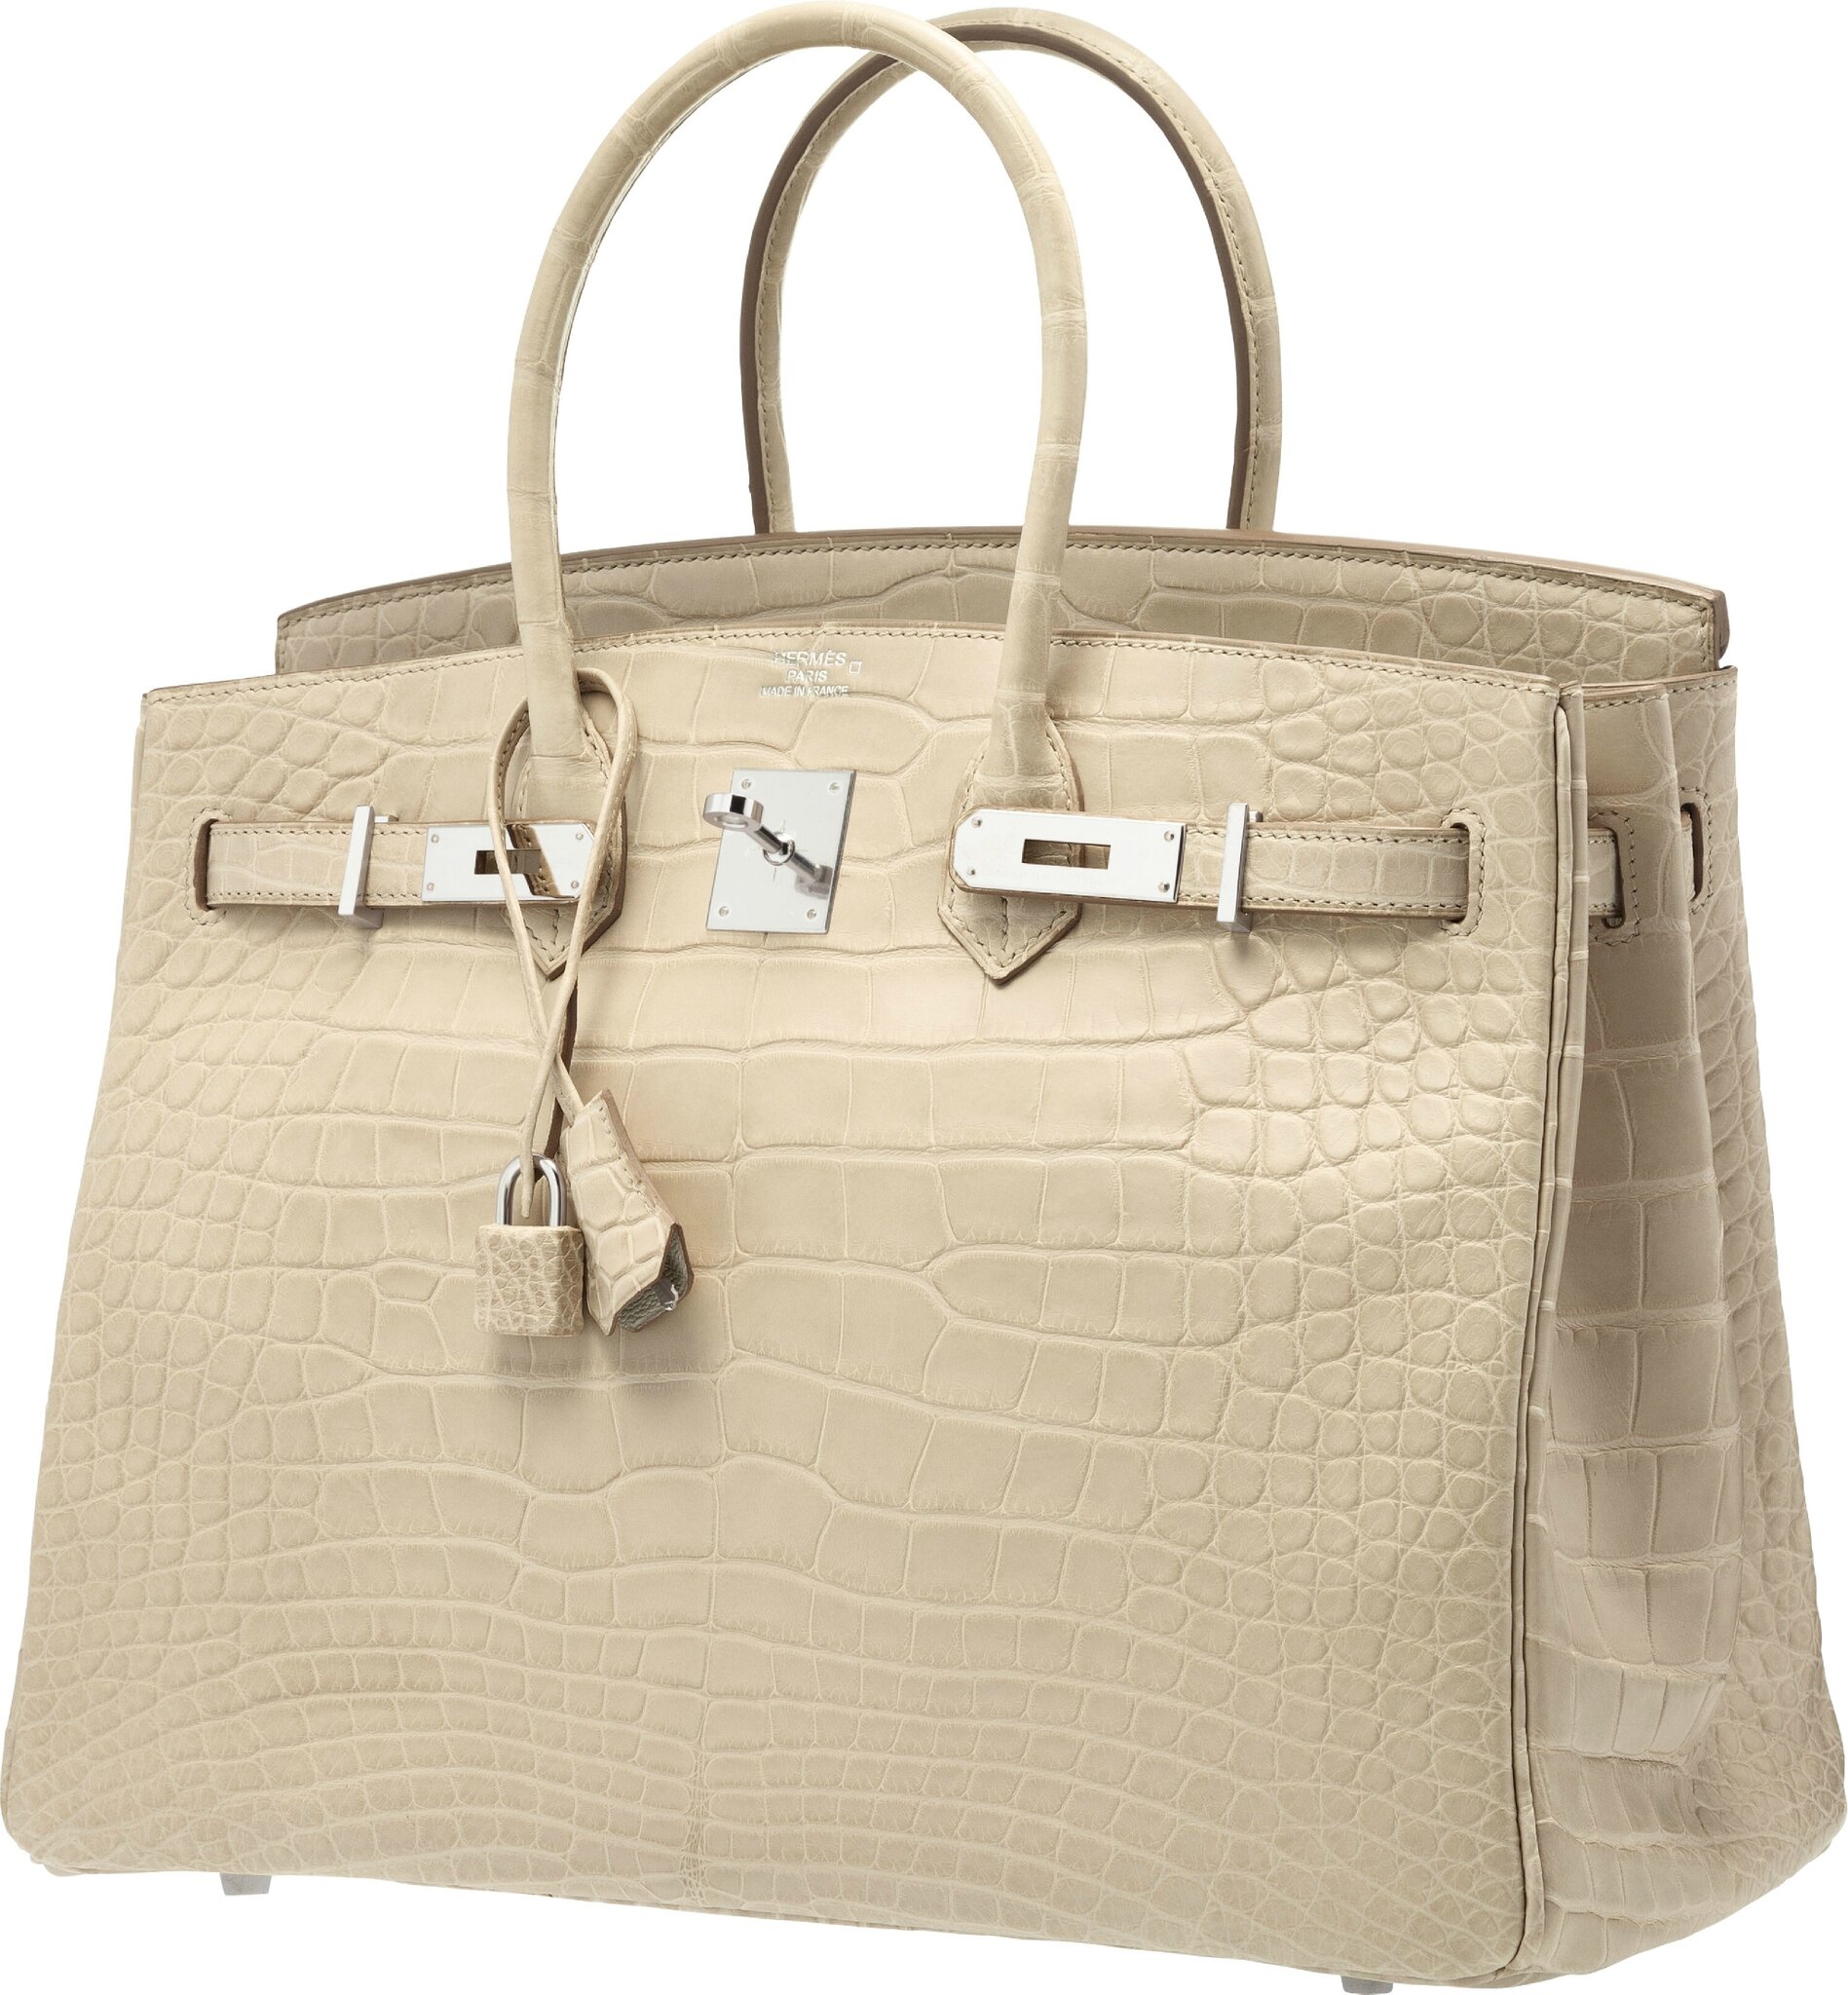 Hermès rarities = Holiday Luxury at Heritage Auctions' accessories